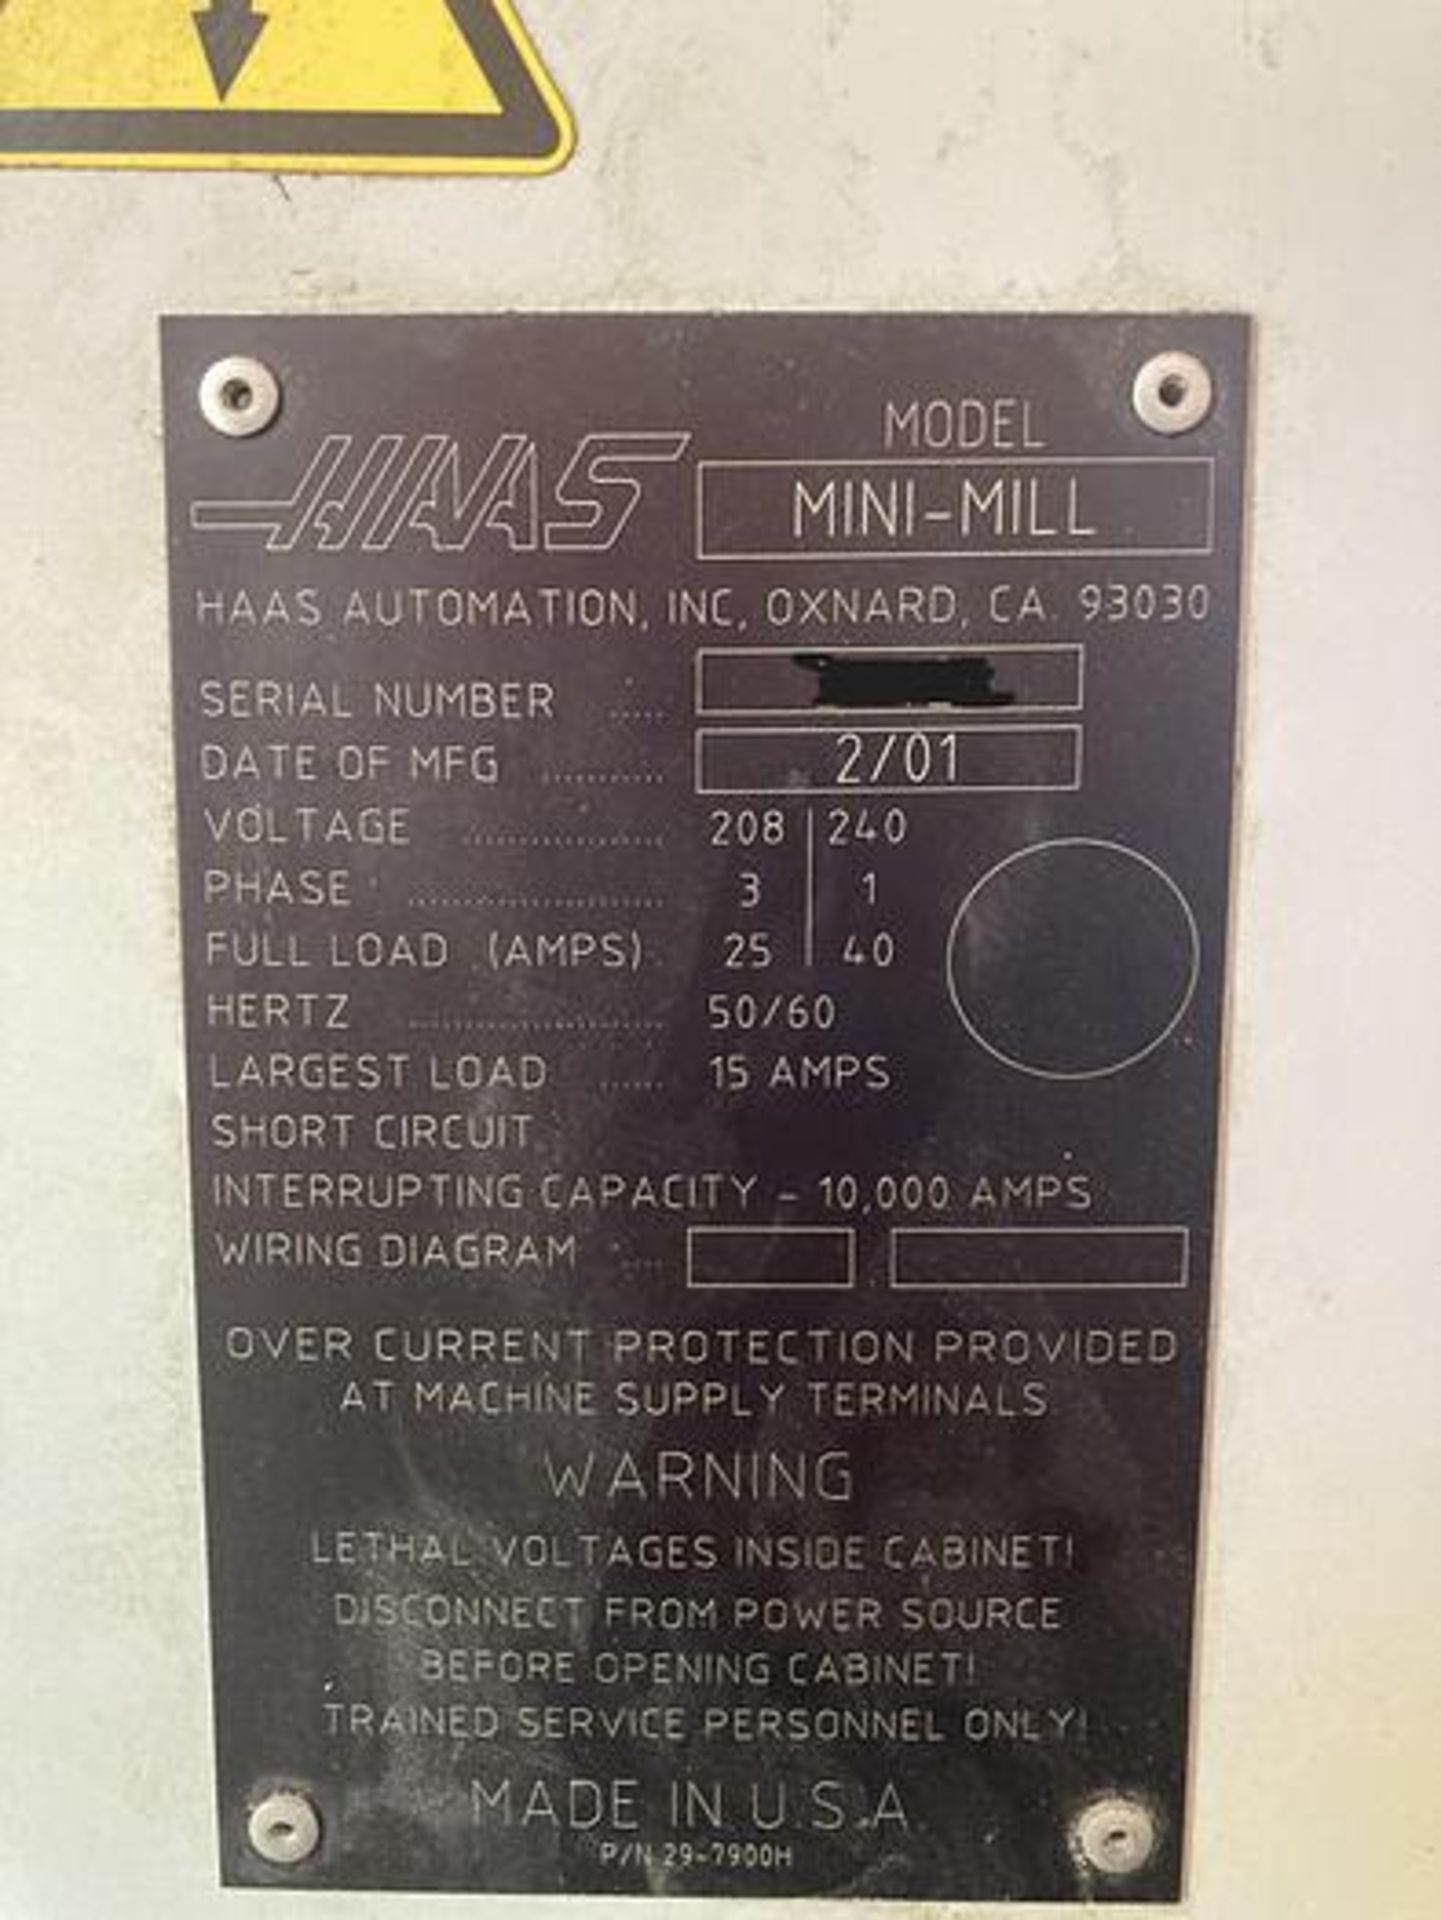 2001 HAAS MINI MILL CNC Vertical Machining Center - Image 7 of 8